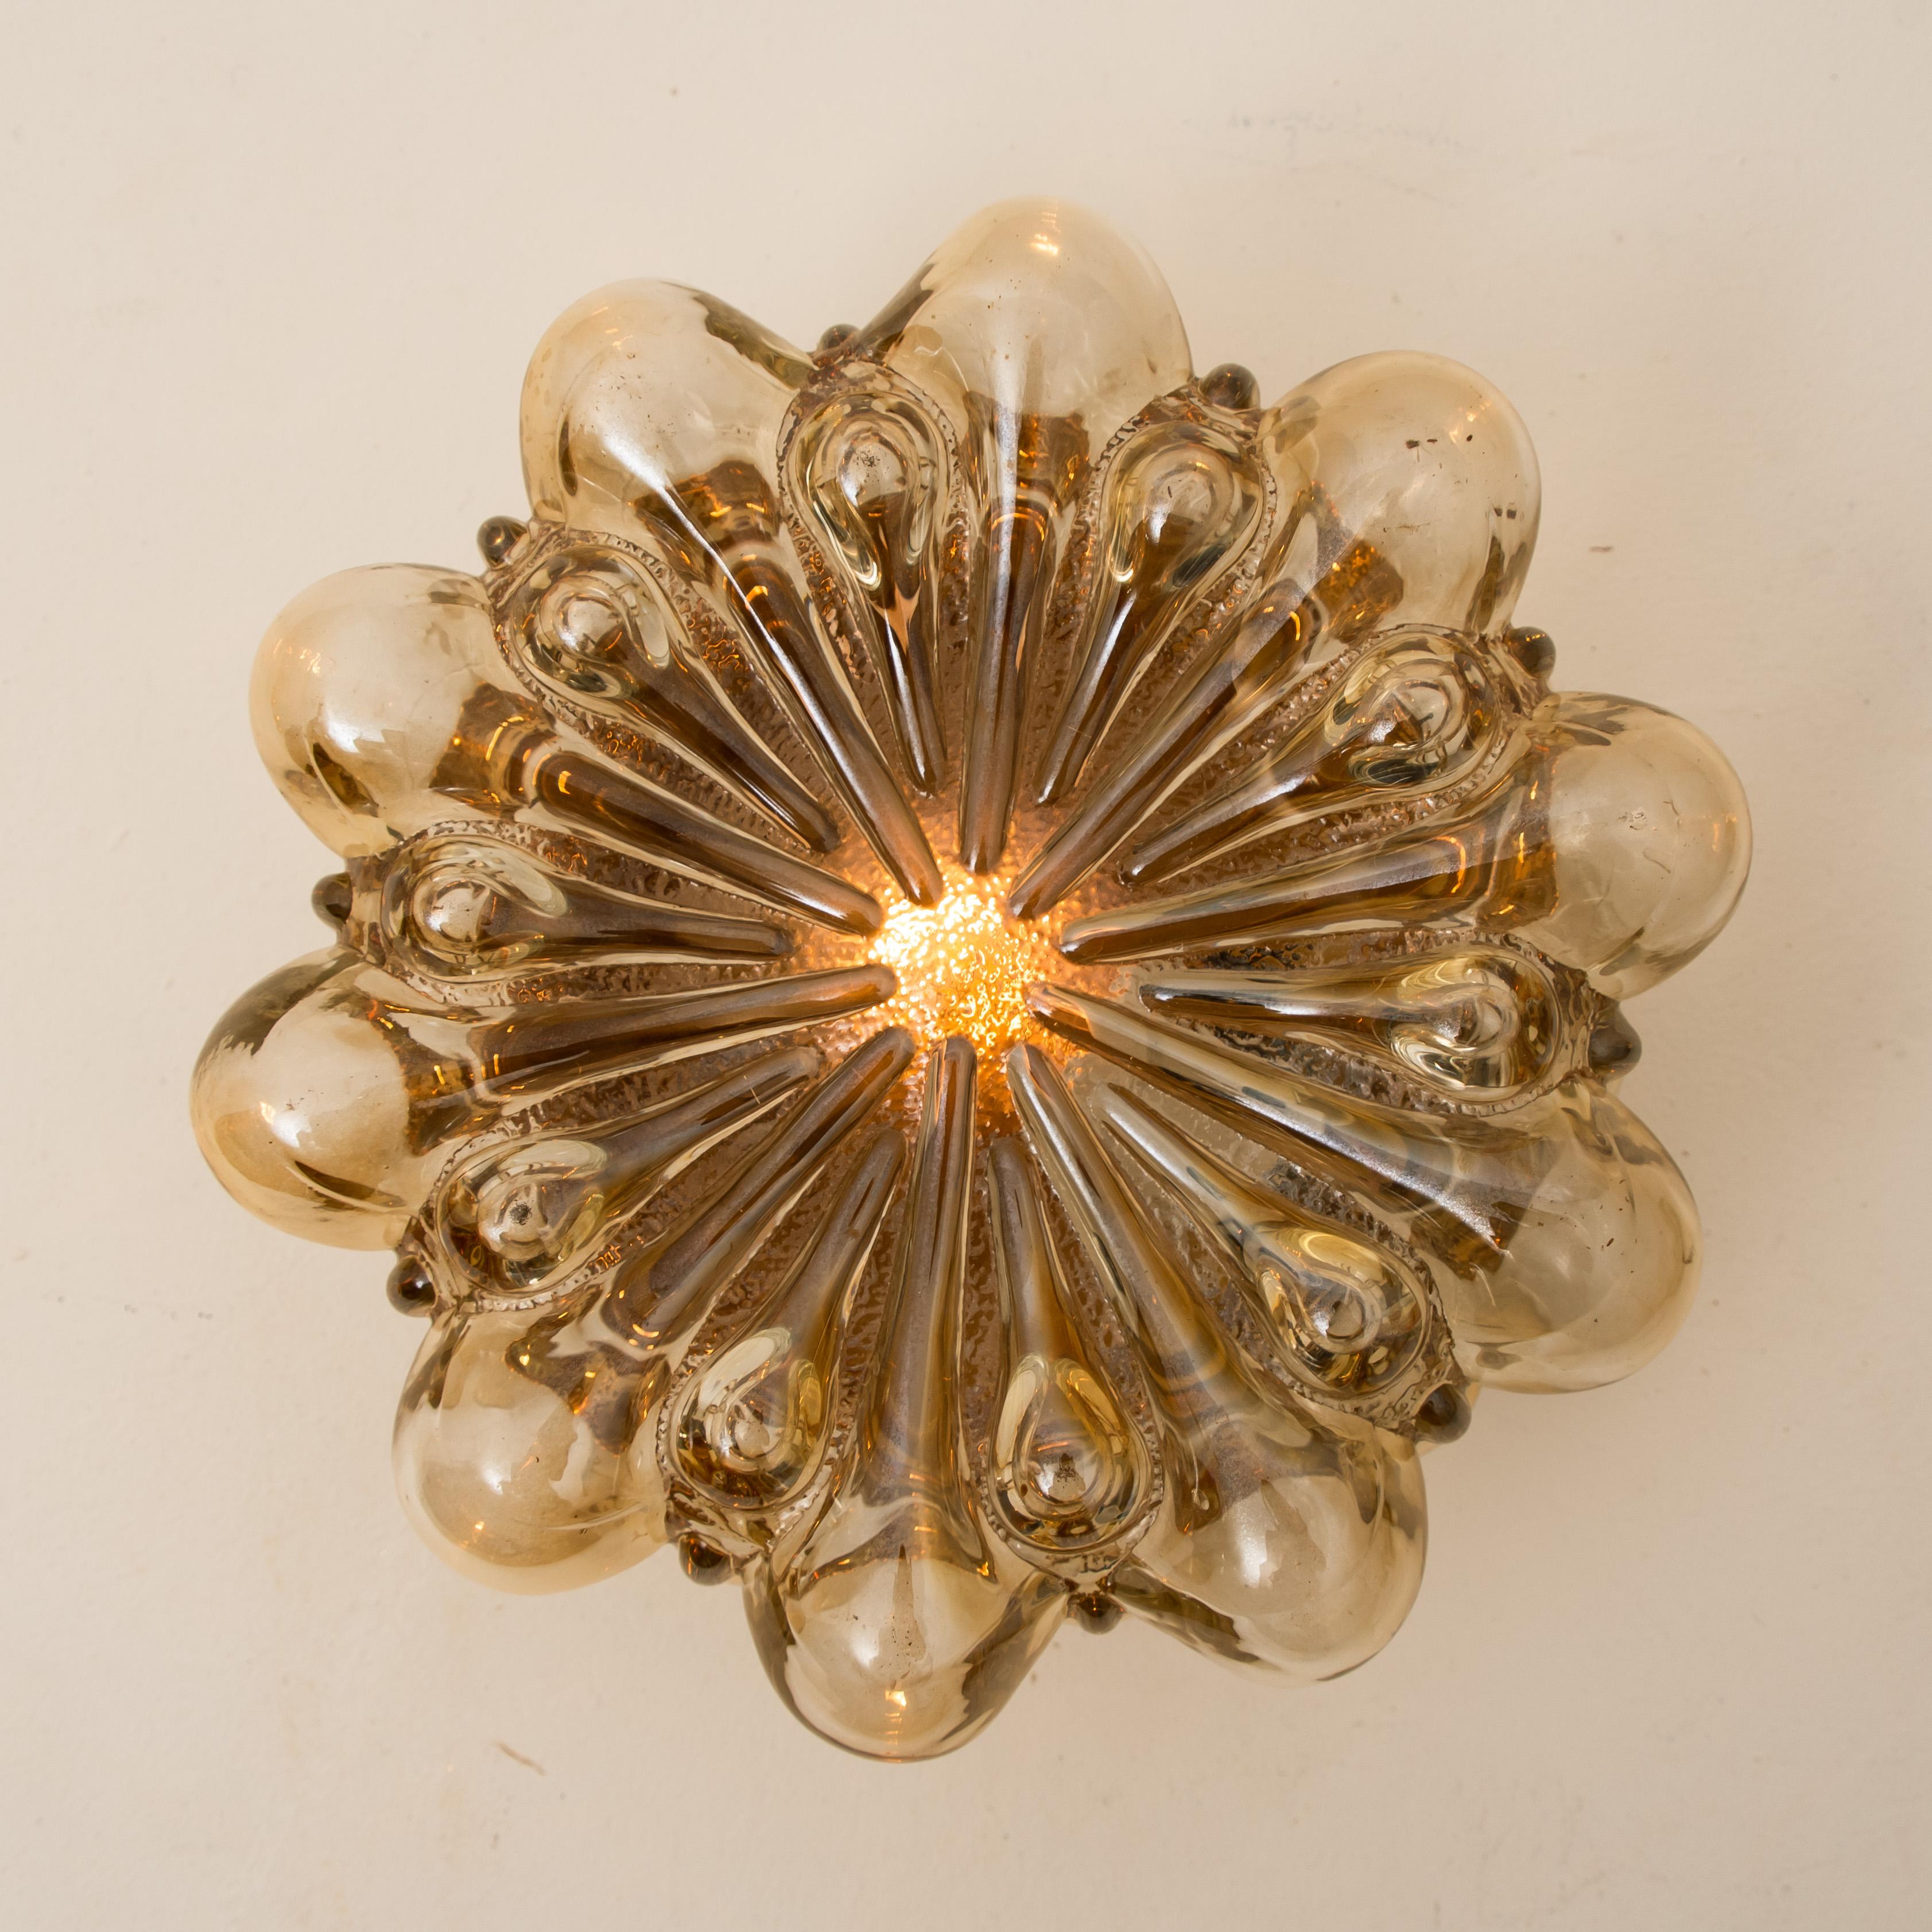 A pair of beautiful bubble glass wall lights designed by Helena Tynell for Glashütte Limburg. A design classic, the amber colored or toned of the hand blown glass gives a wonderful and warm glow. 

Heavy quality and in excellent vintage condition.